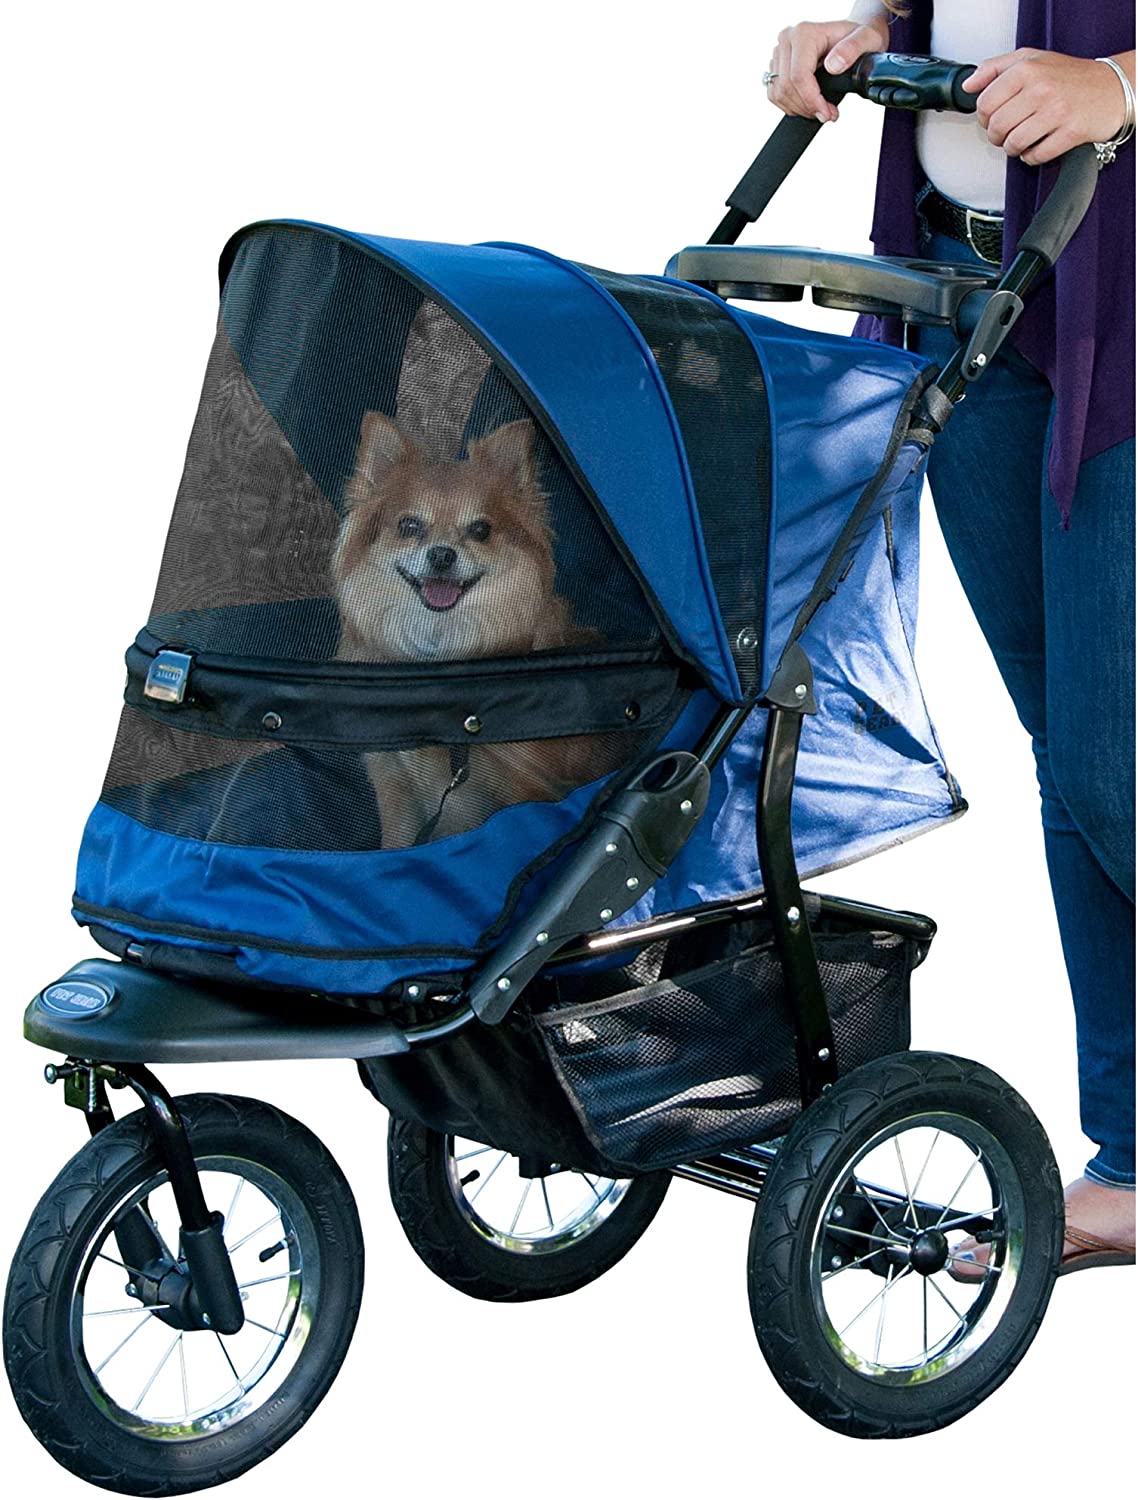 Type: Strollers